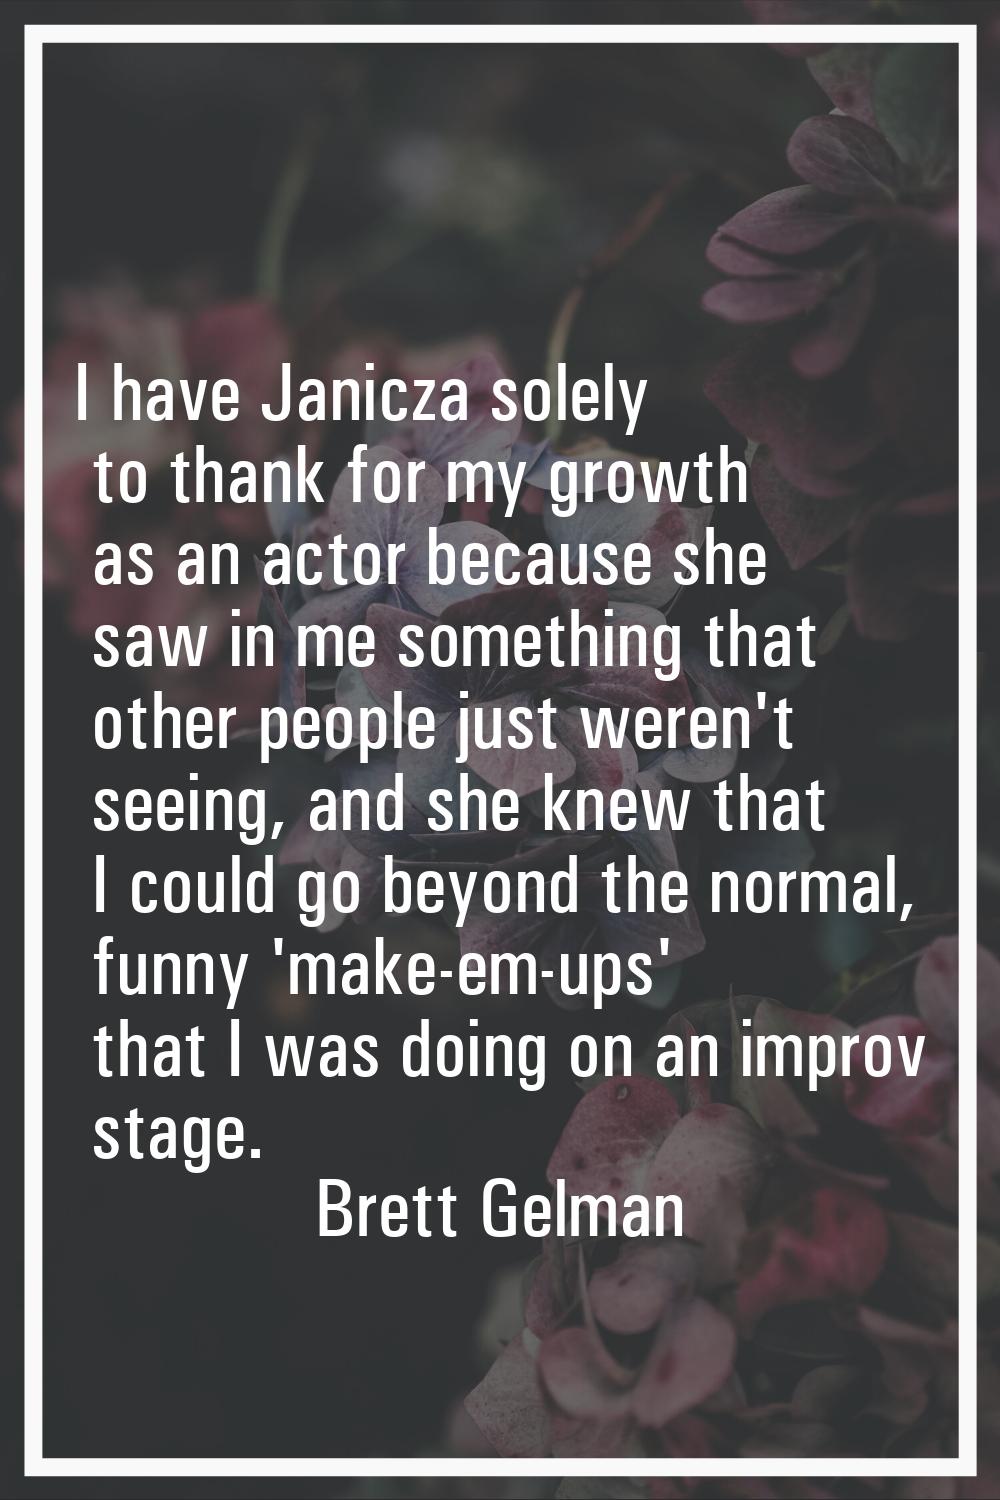 I have Janicza solely to thank for my growth as an actor because she saw in me something that other